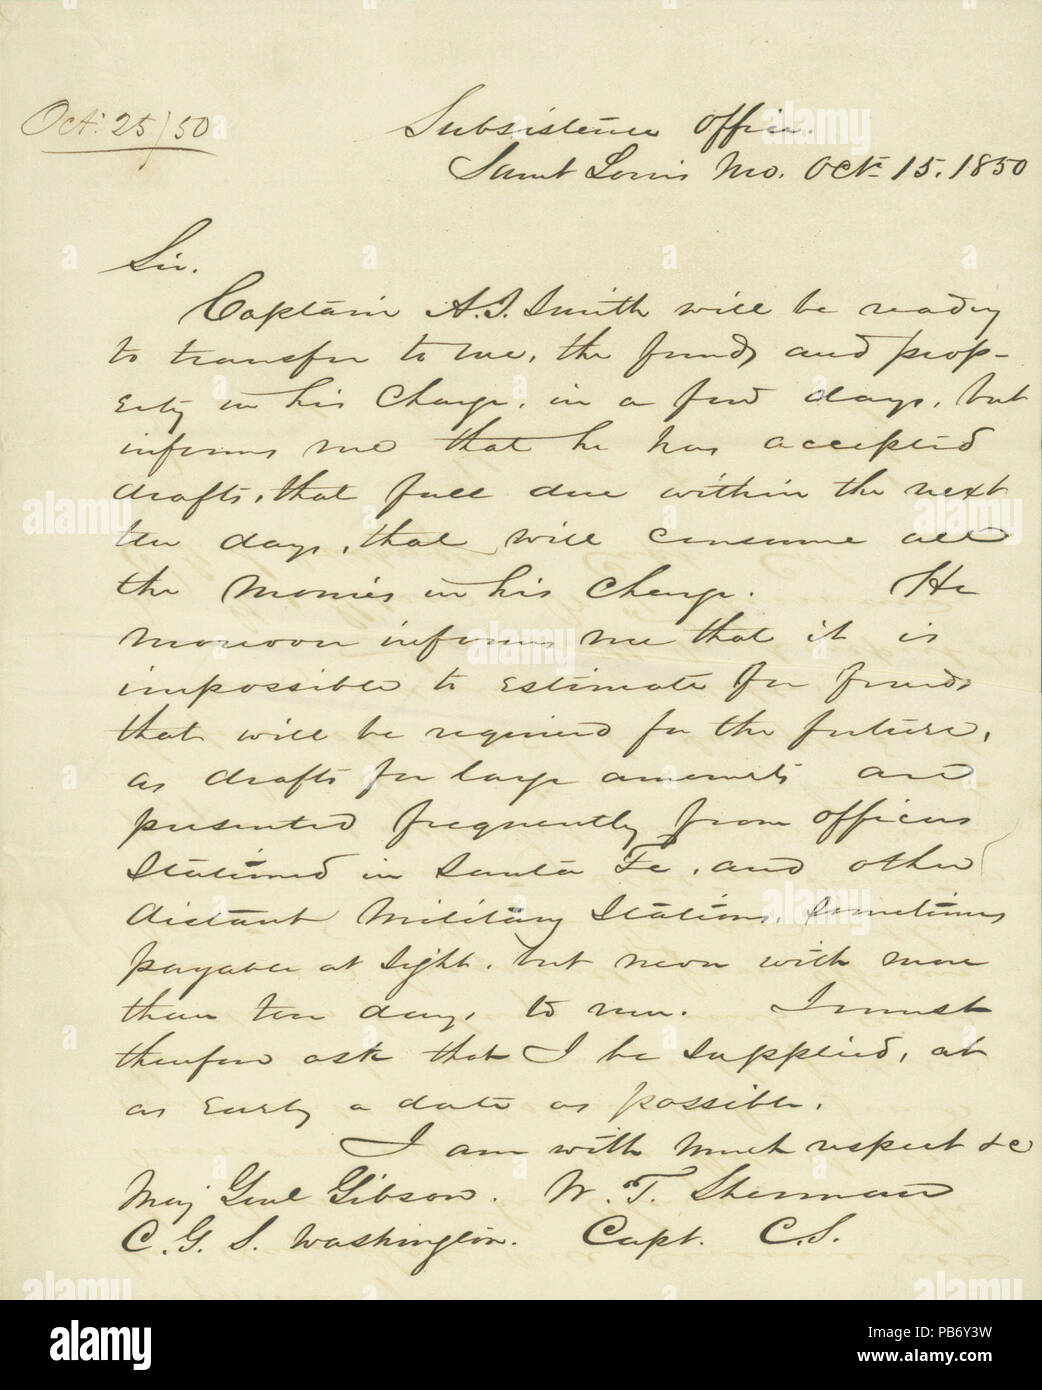 914 Letter signed W.T. Sherman, Subsistence Office, Saint Louis, Mo., to Major General George Gibson, Washington, October 1, 1850 Stock Photo